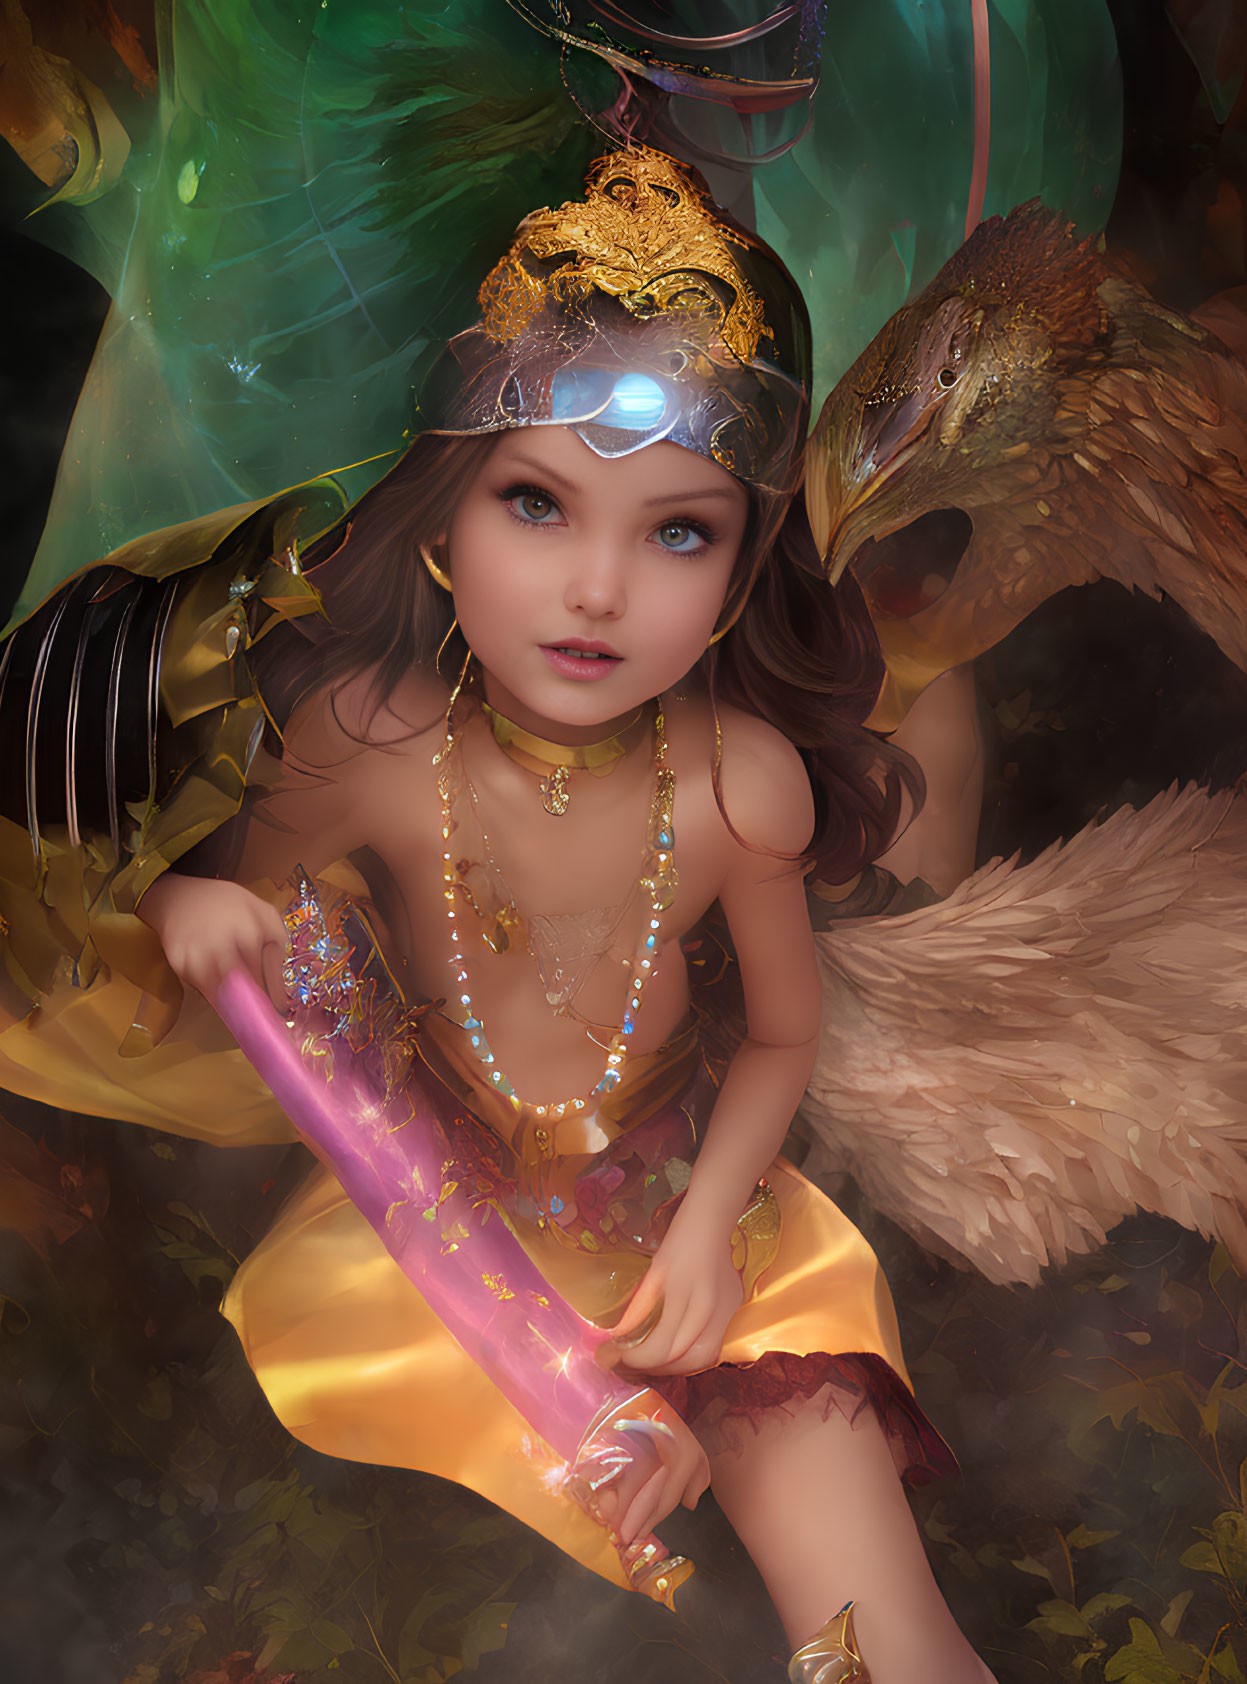 Child in fantasy attire with crown and crystal staff, beside mythical bird